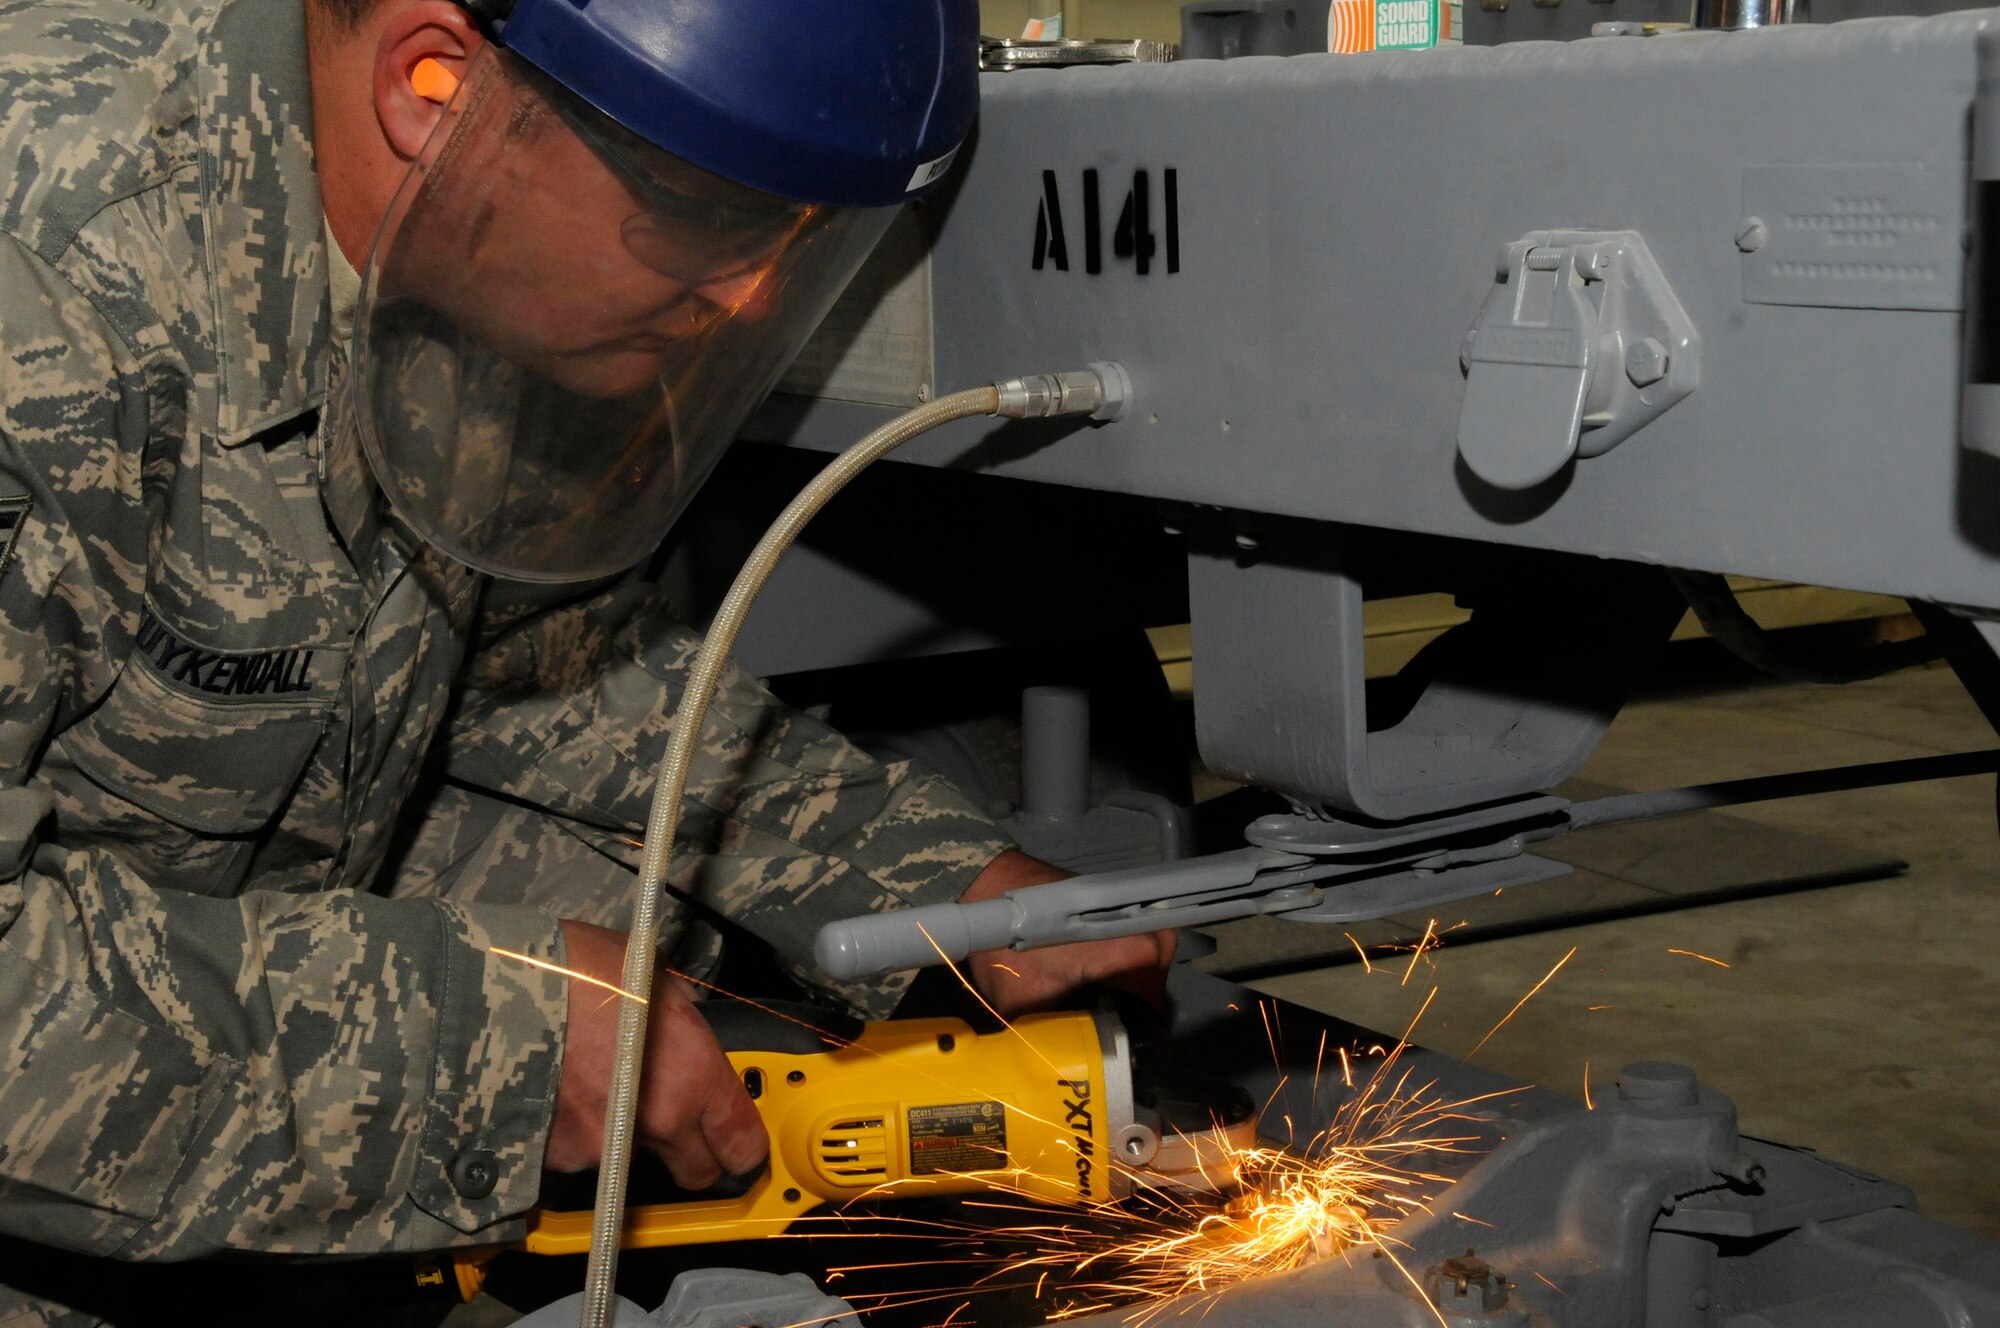 Staff Sgt. Brian Kuykendall, munitions systems journeyman assigned to the 379th Expeditionary Maintenance Squadron, uses a cut-off tool to remove a castle nut from the tie-rod of a munitions trailer Nov. 14, at an undisclosed air base in Southwest Asia. The 379th EMXS munitions section delivers weapons to the flight line to be used in the Global War on Terrorism.  Sergeant Kuykendall, a native of Reedley, Calif., is deployed from Ellsworth Air Force Base, S.D., in support of Operations Iraqi and Enduring Freedom and Joint Task Force-Horn of Africa. (U.S. Air Force photo by Staff Sgt. Darnell T. Cannady/Released)